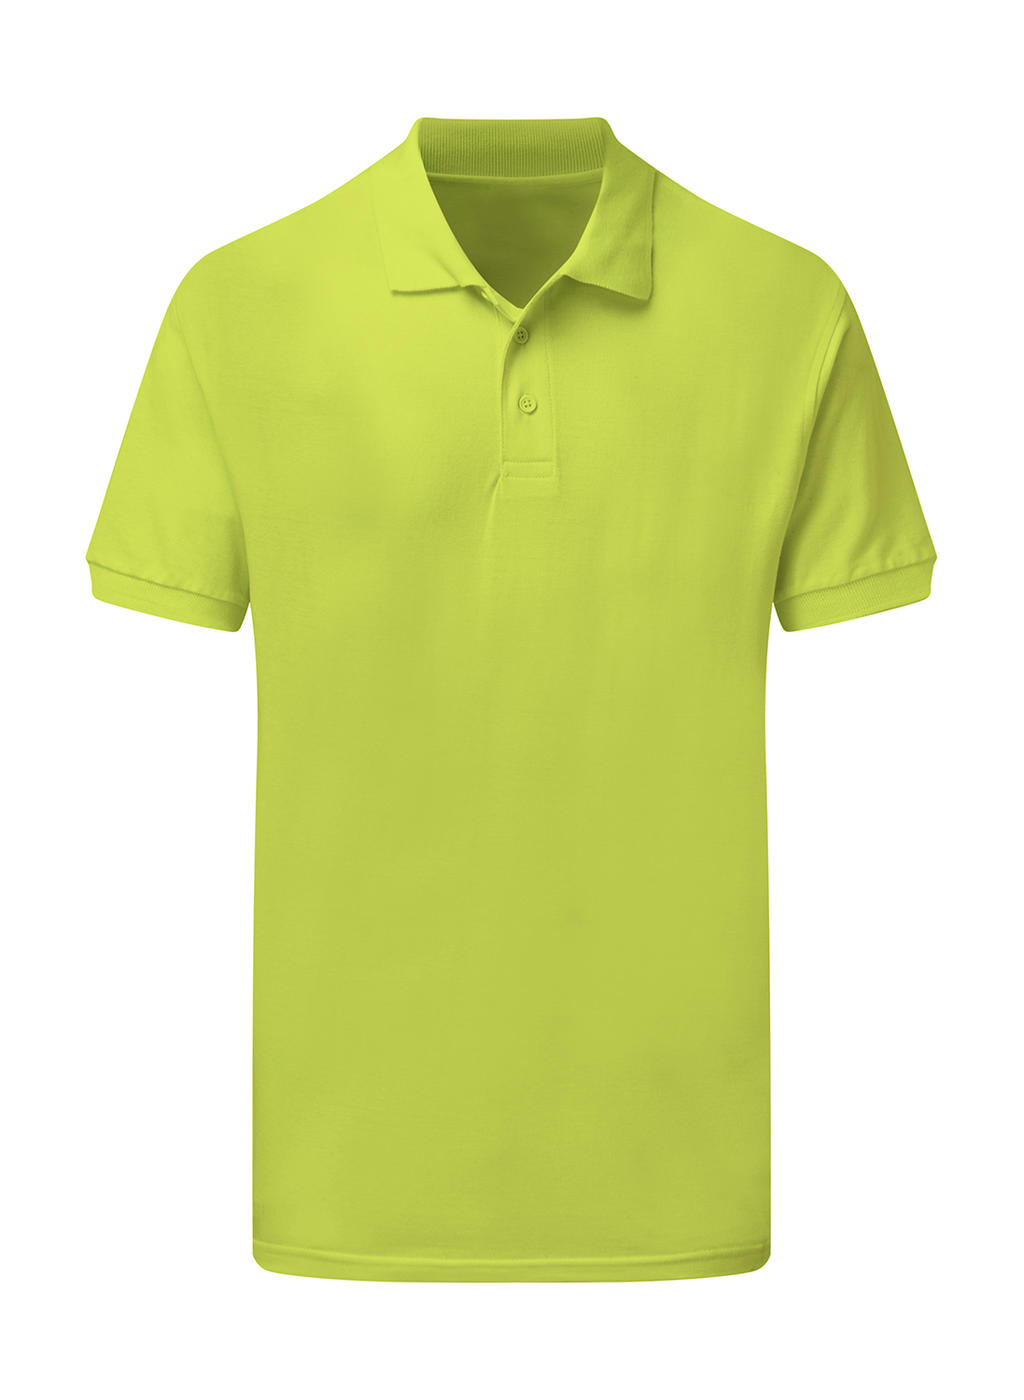  Mens Cotton Polo in Farbe Lime